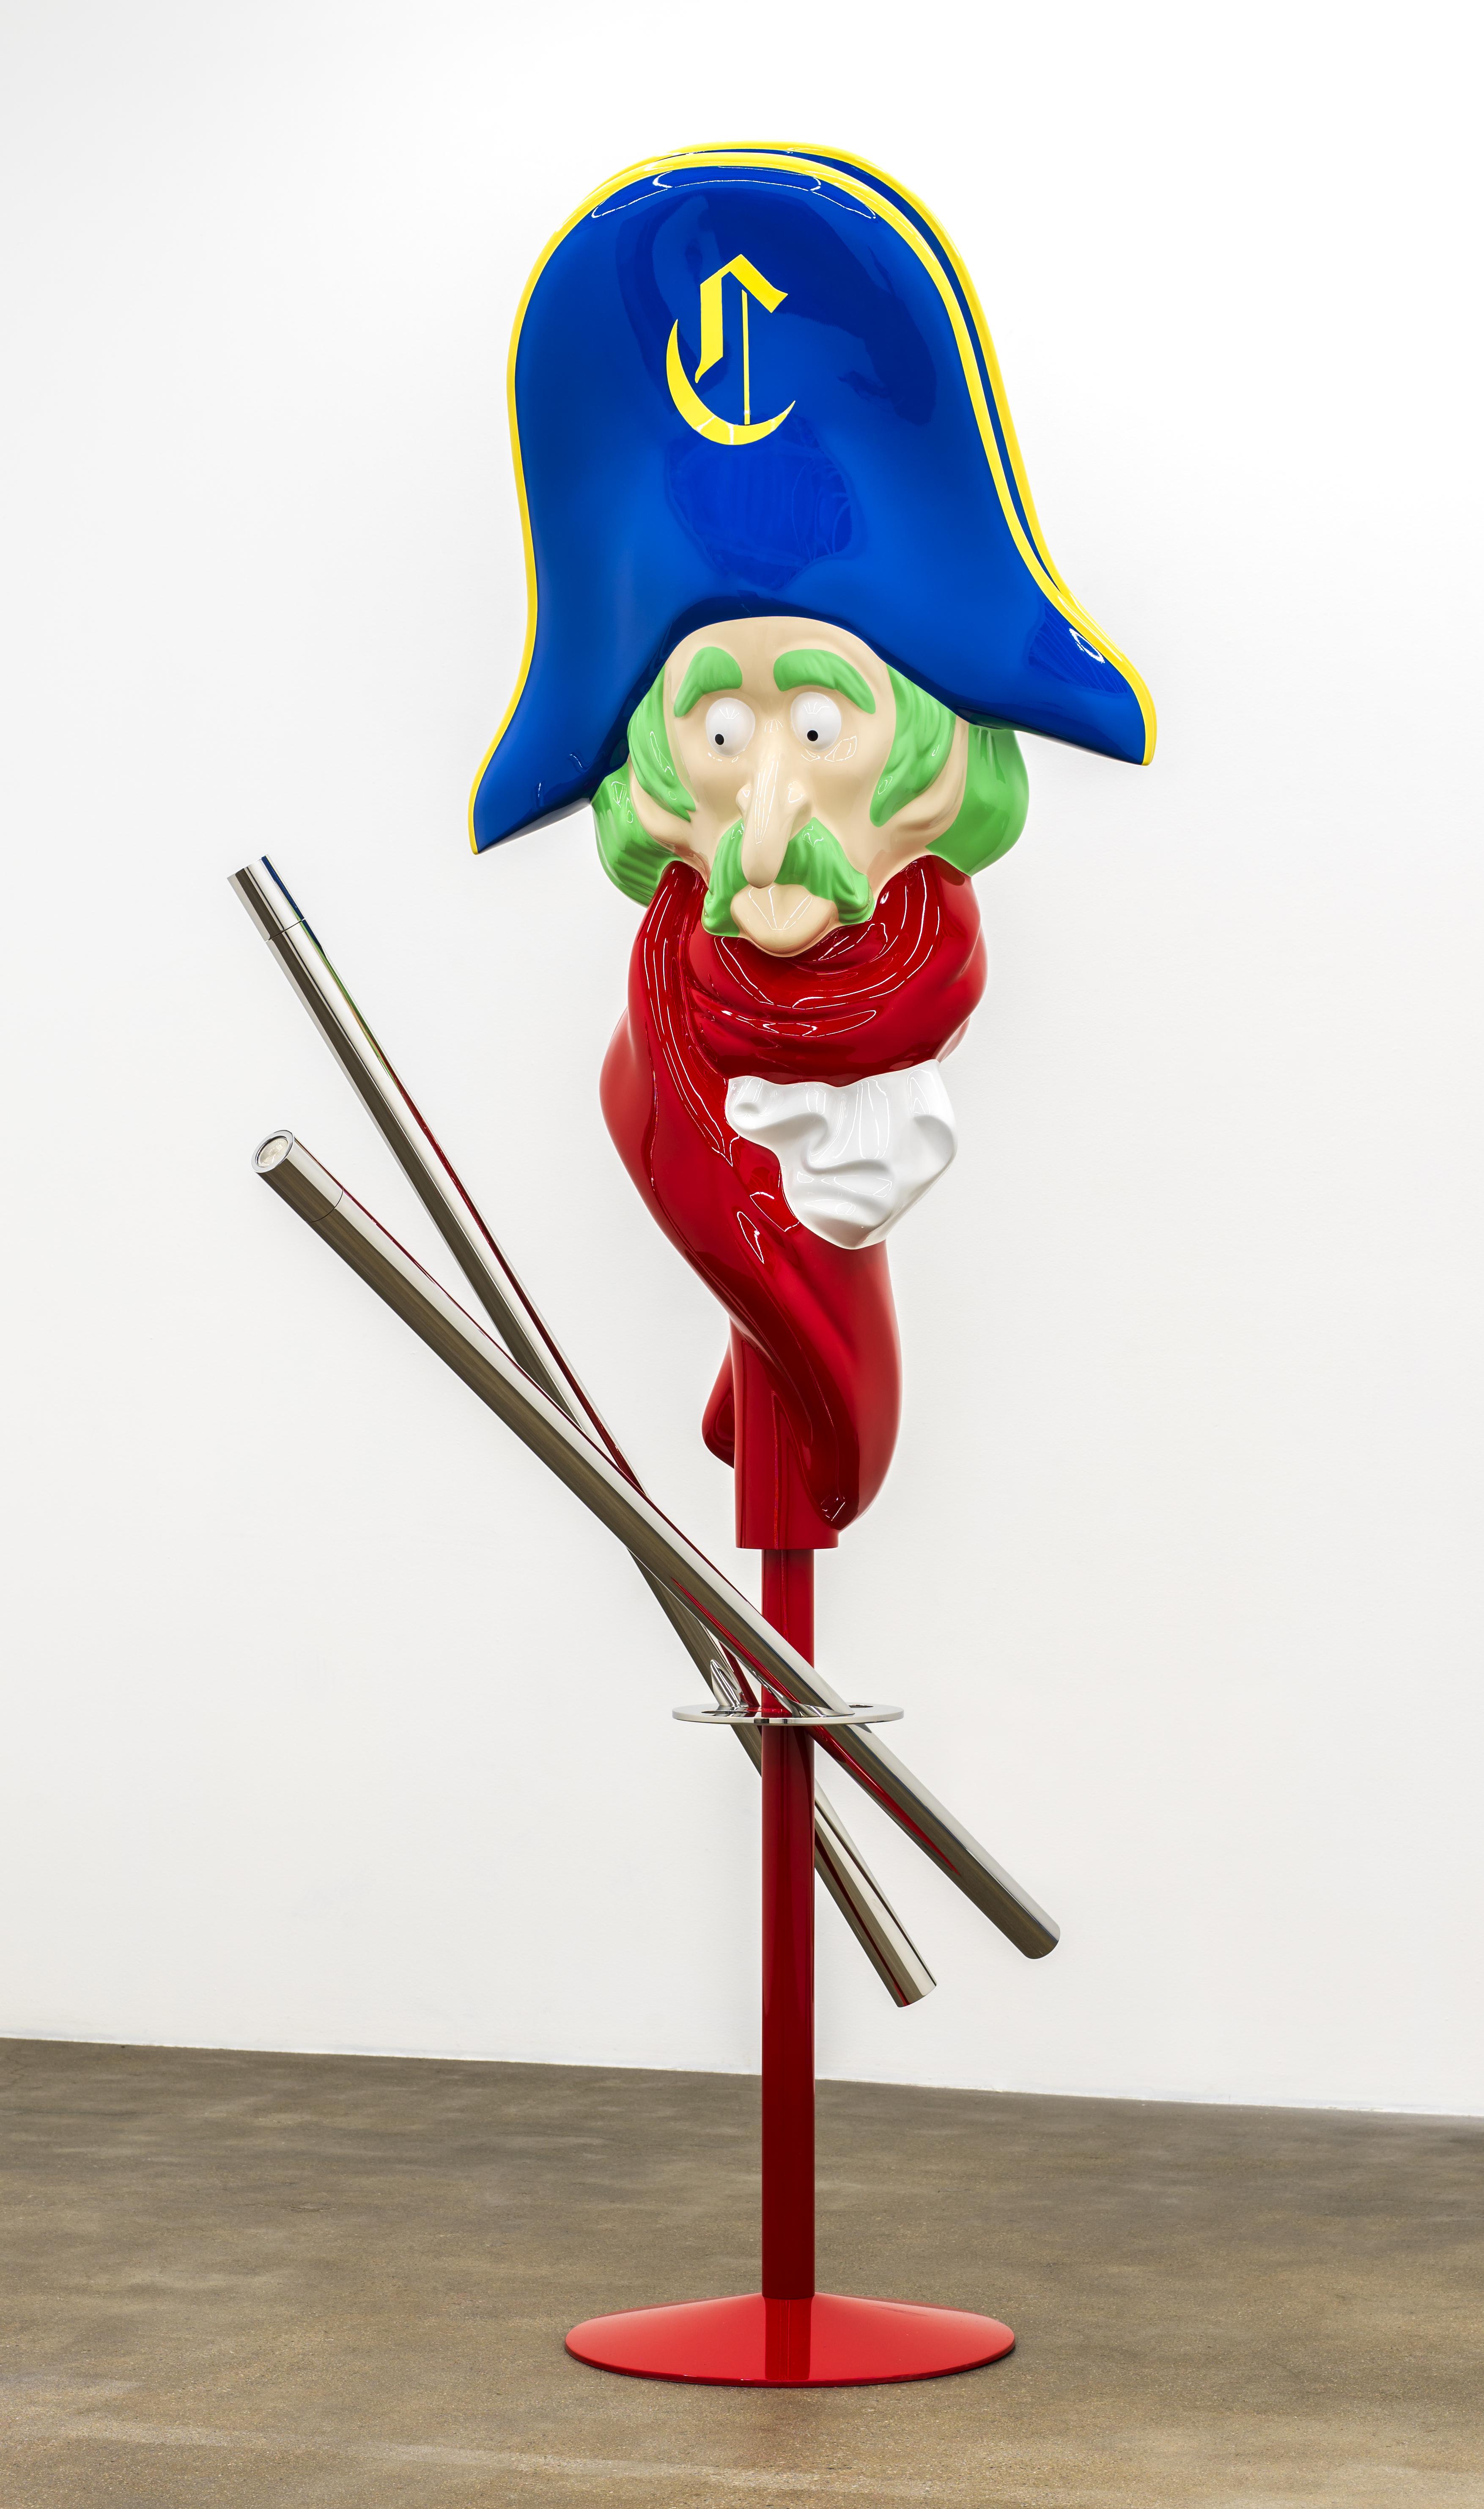 A red column resembling a coat stand balances two silver tubes and is topped by the head of a colorful pirate with green hair, a blue hat, and a red scarf.